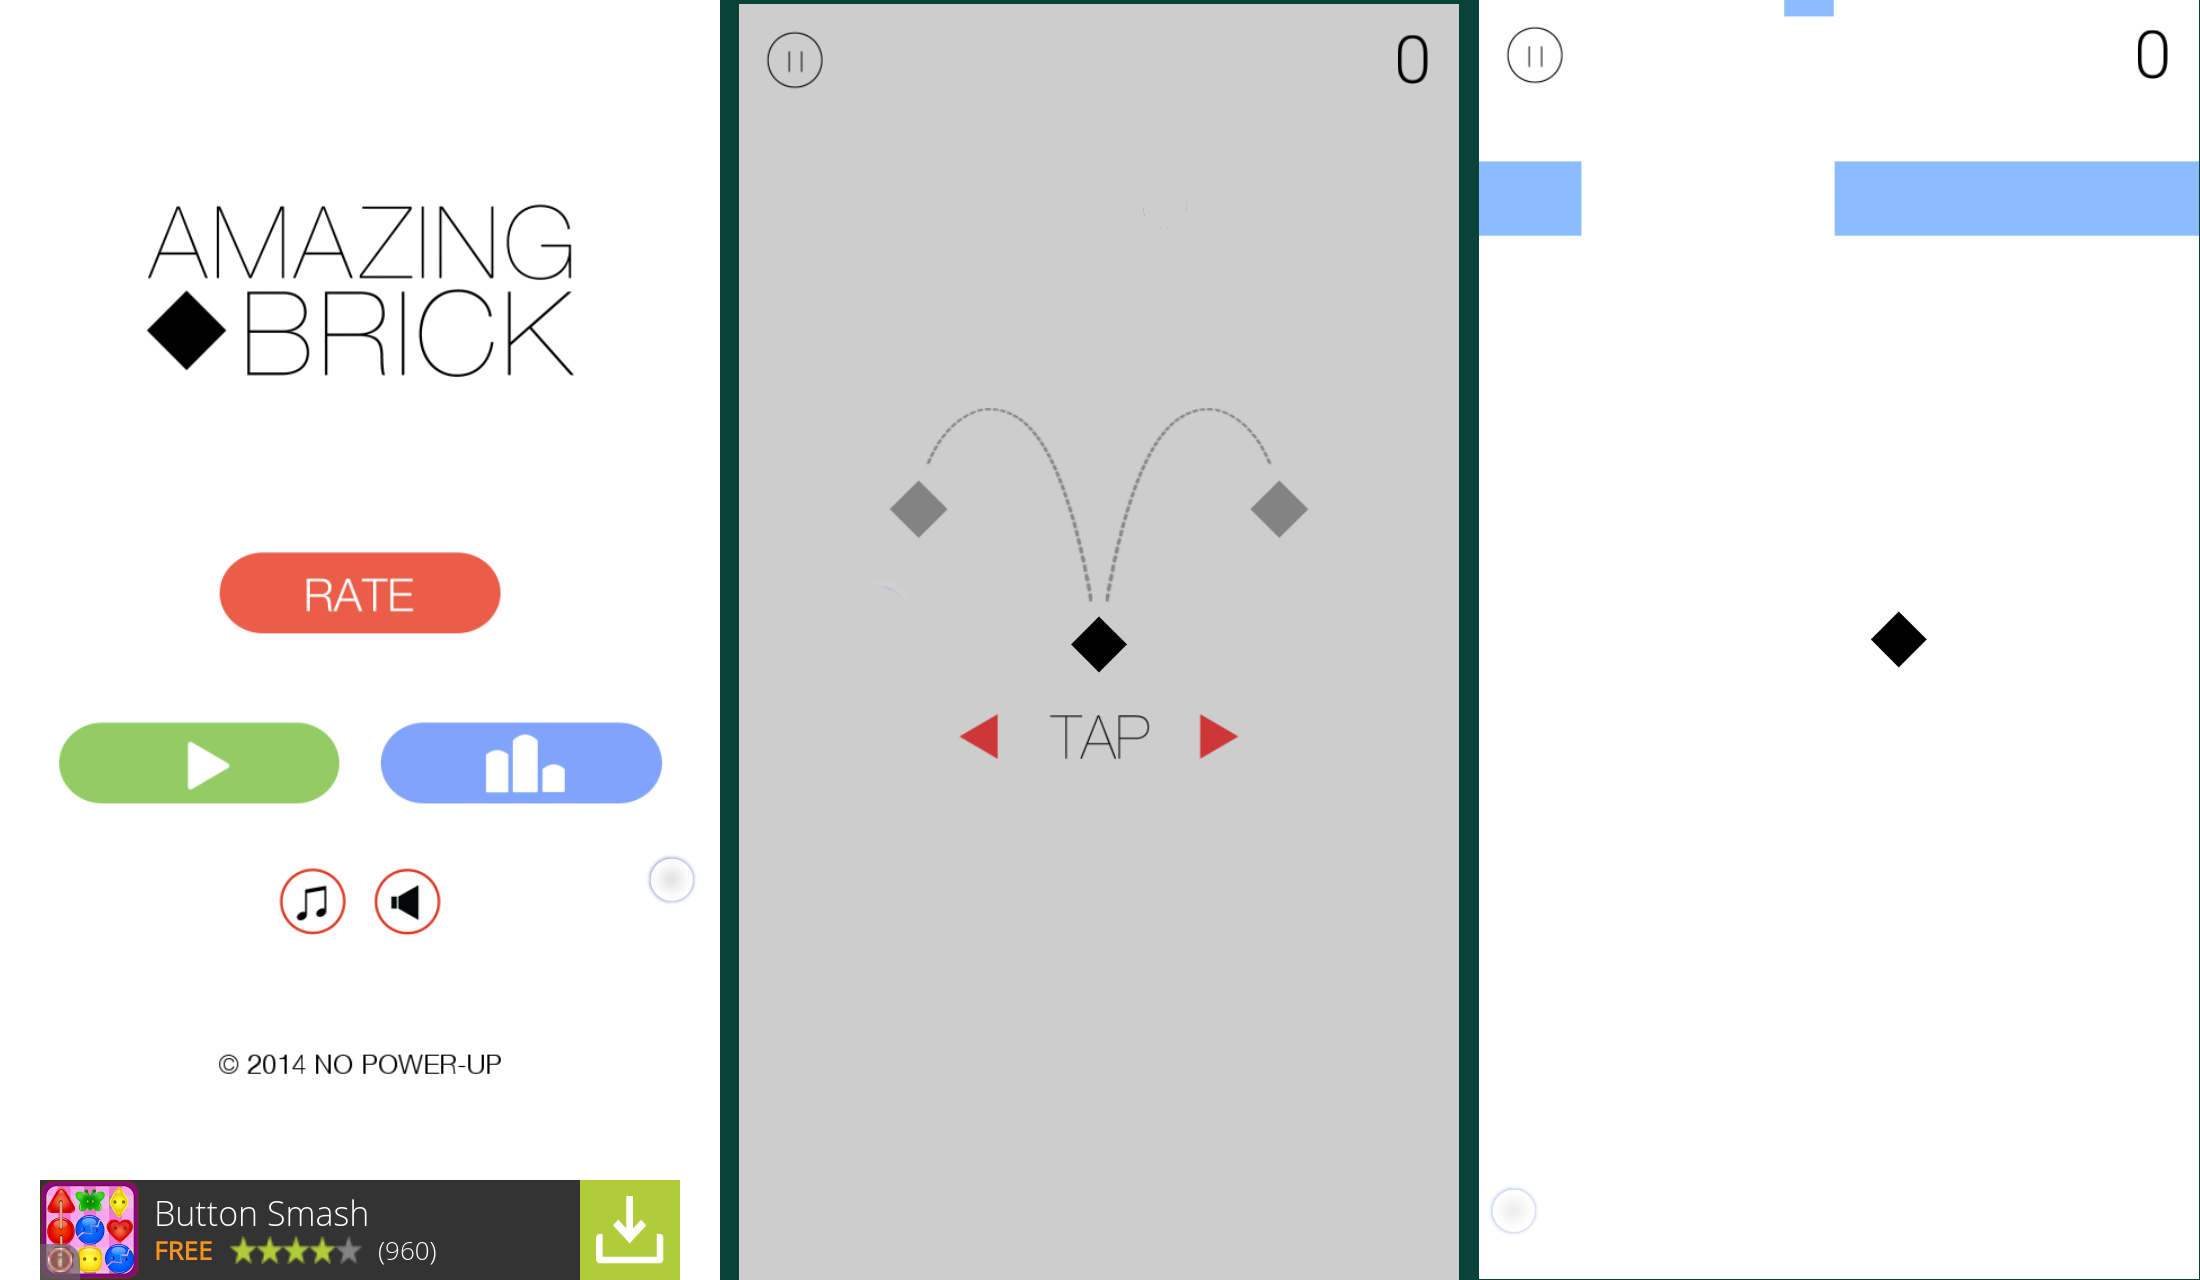 From the menu, one tap to play, with a fairly brief tutorial which requires the correct interaction to start the game - but only confirms players understood the input, not how to use it correctly.